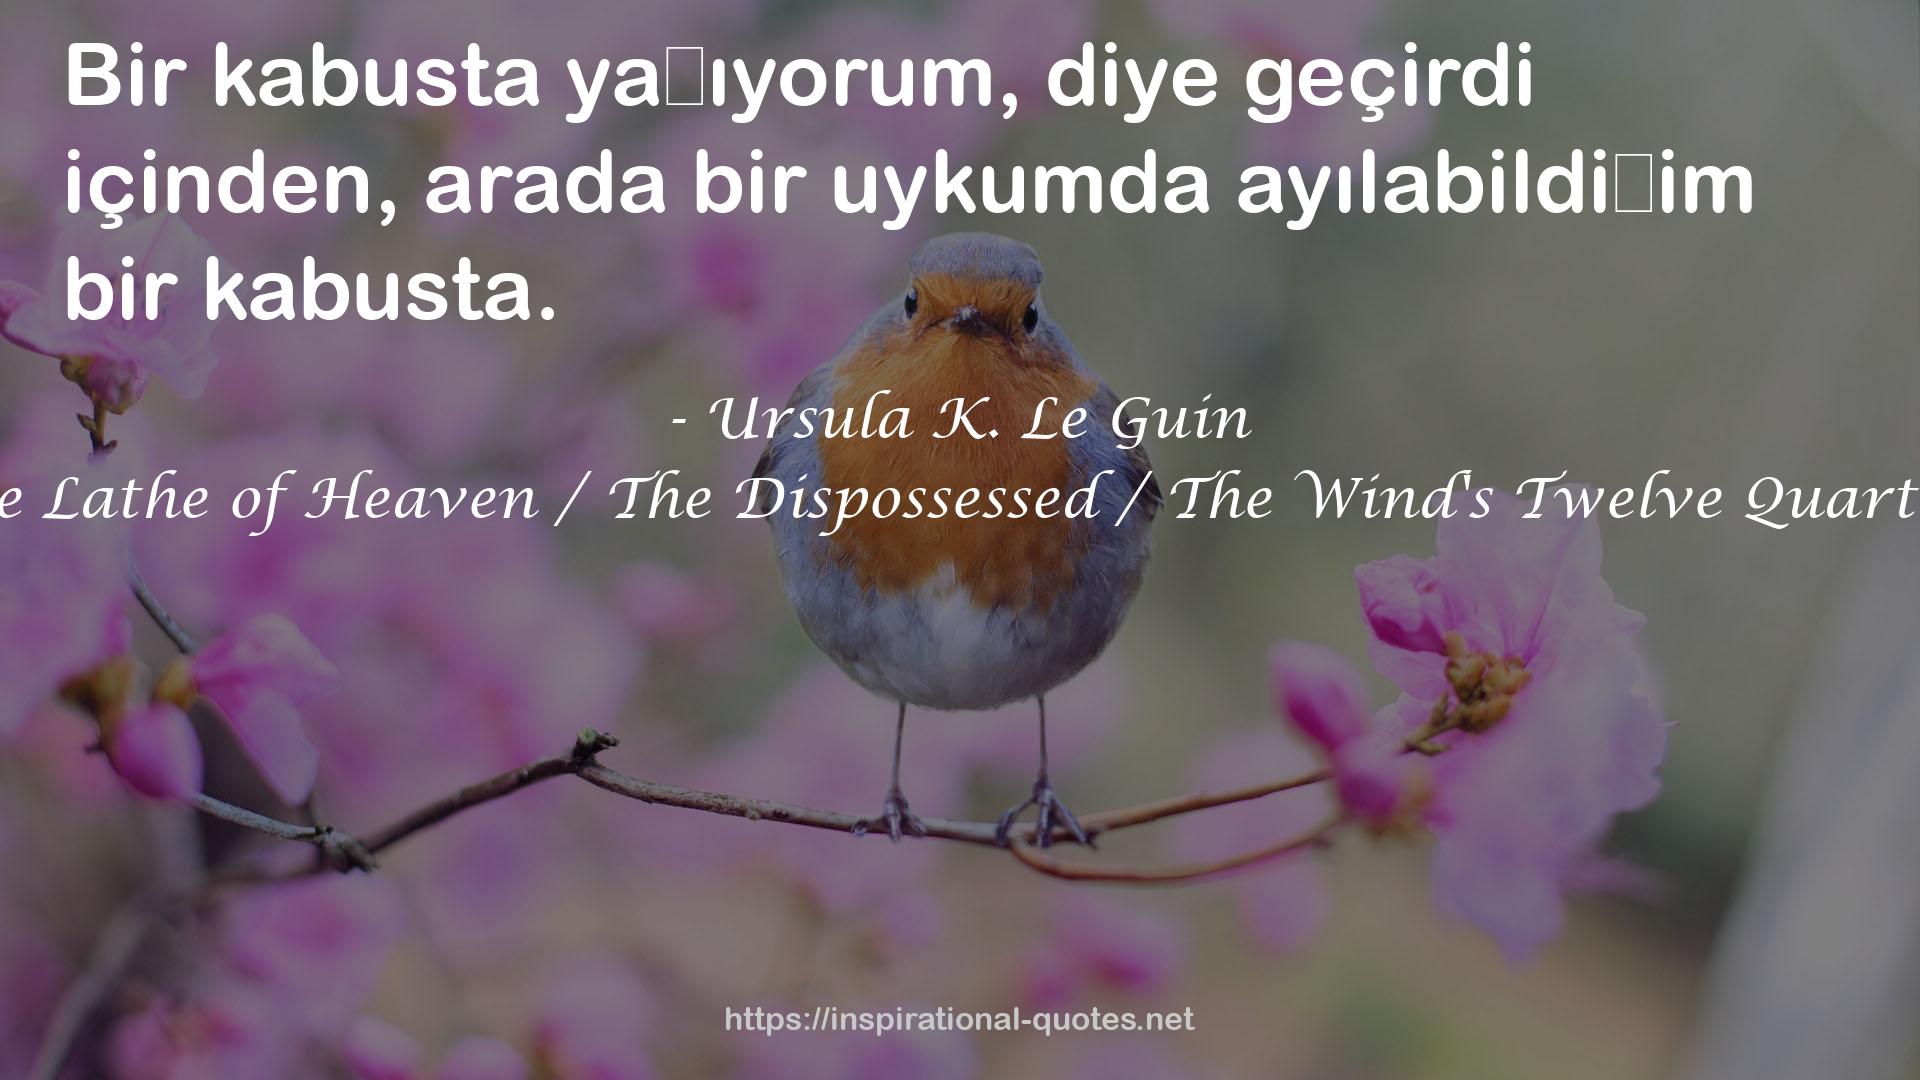 The Lathe of Heaven / The Dispossessed / The Wind's Twelve Quarters QUOTES